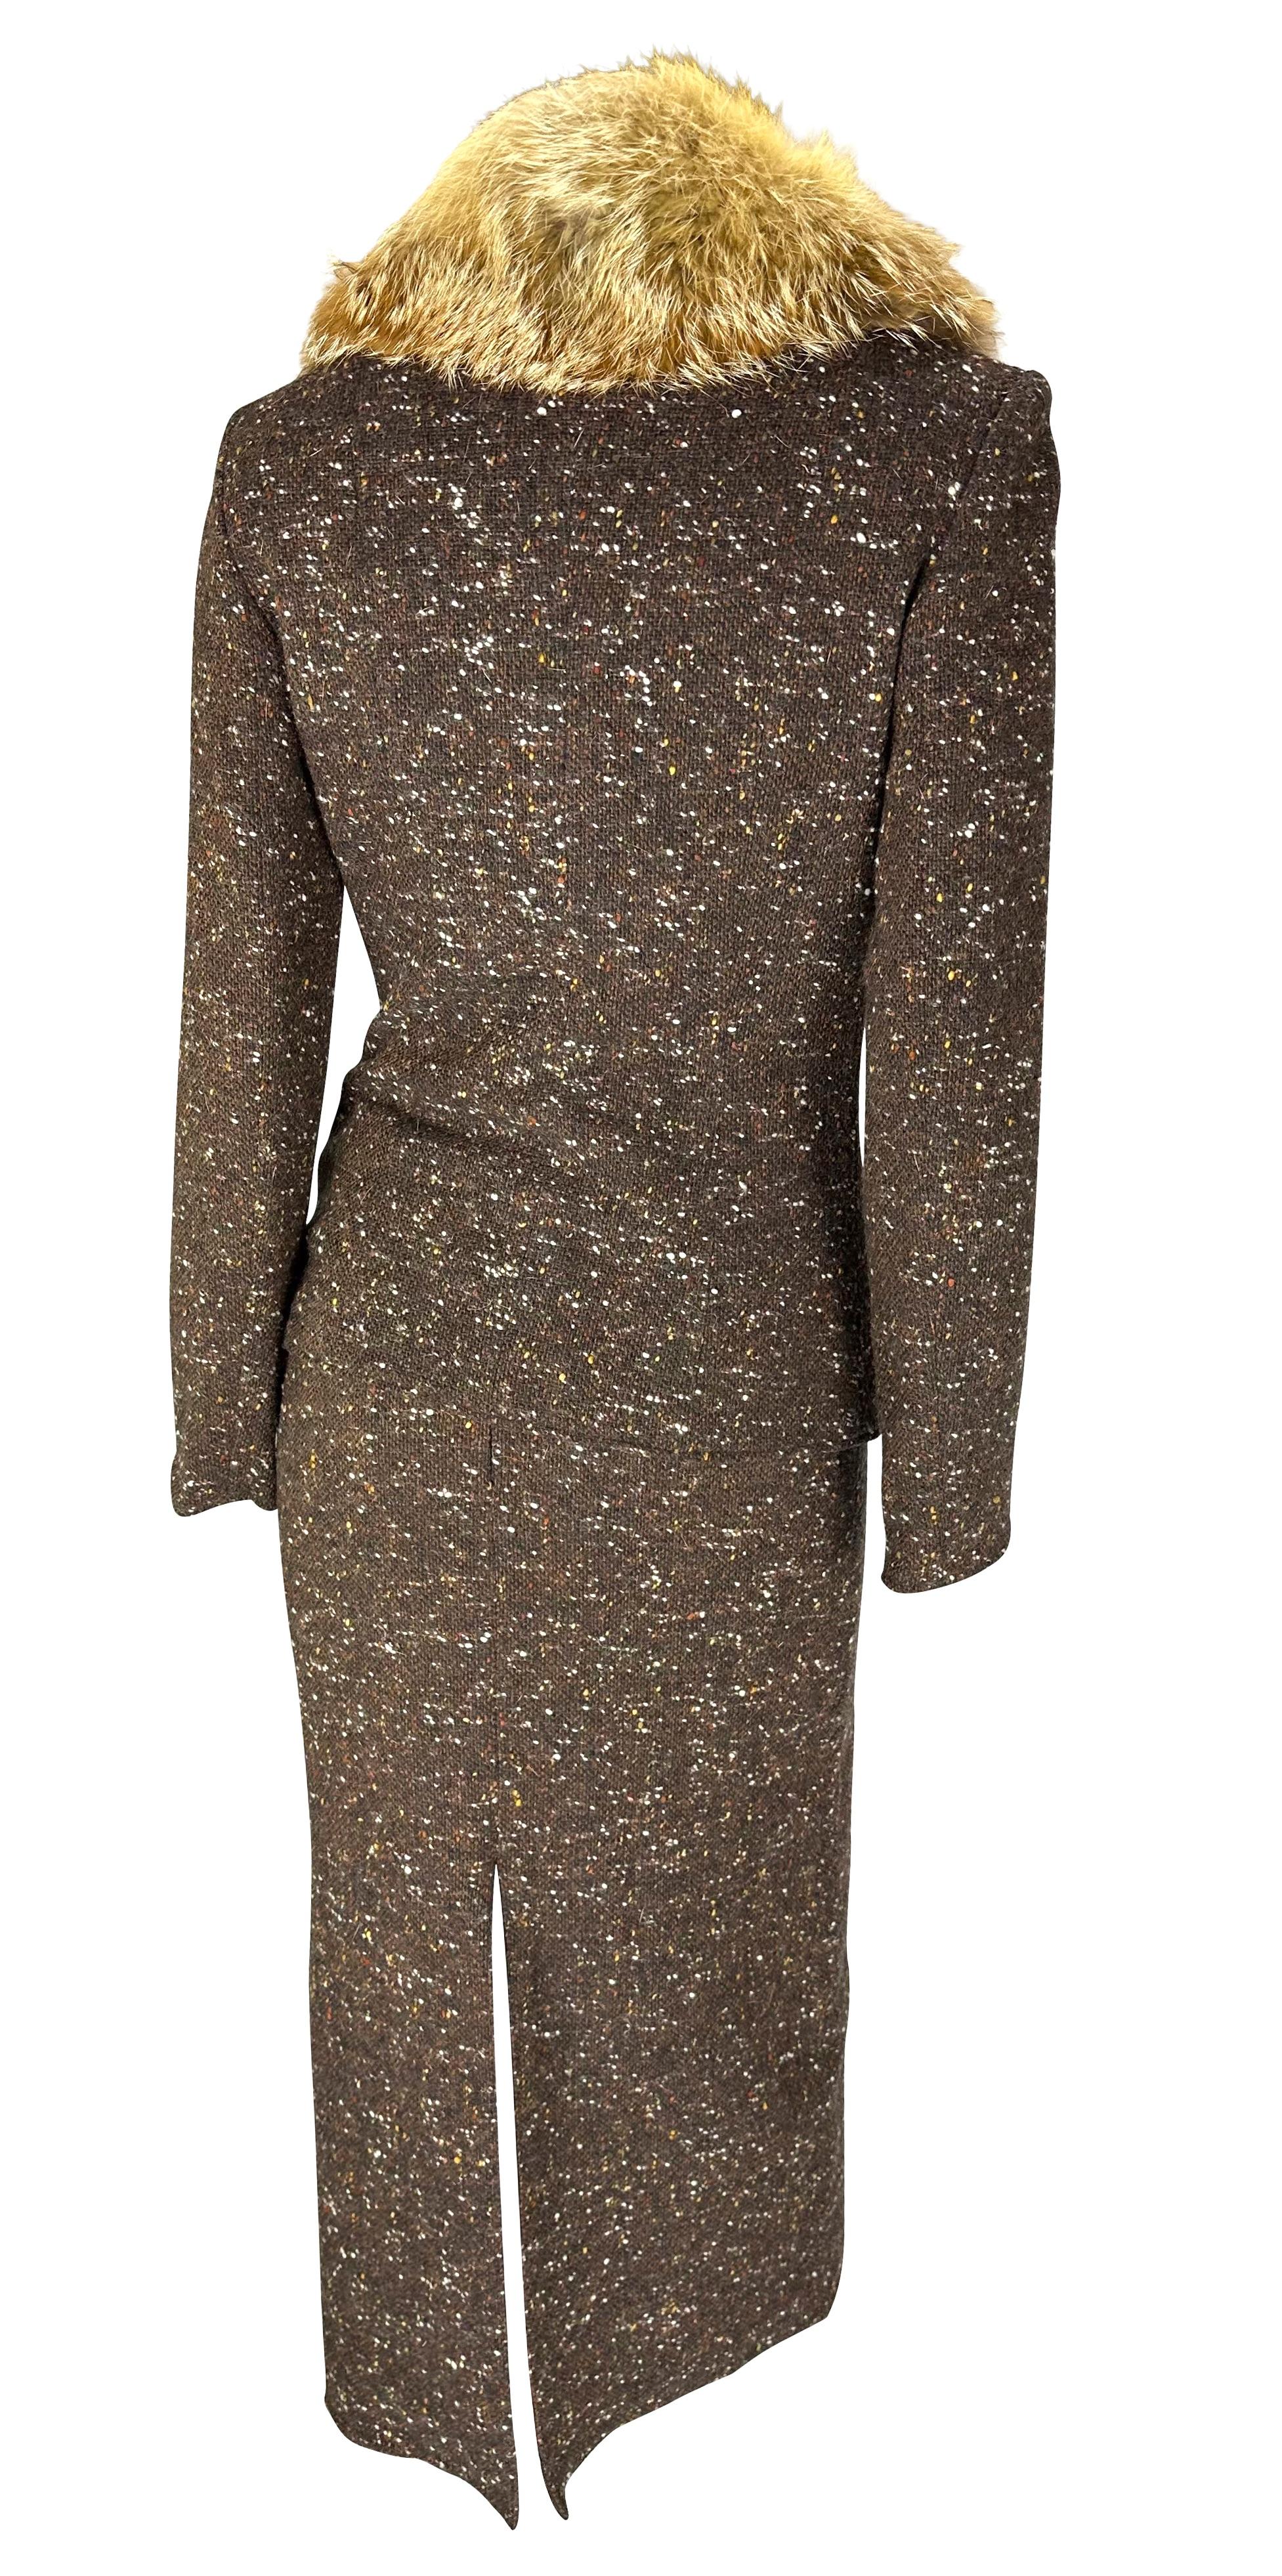 F/W 2001 Christian Dior by John Galliano Fur Trim Slit Brown Tweed Skirt Suit For Sale 1